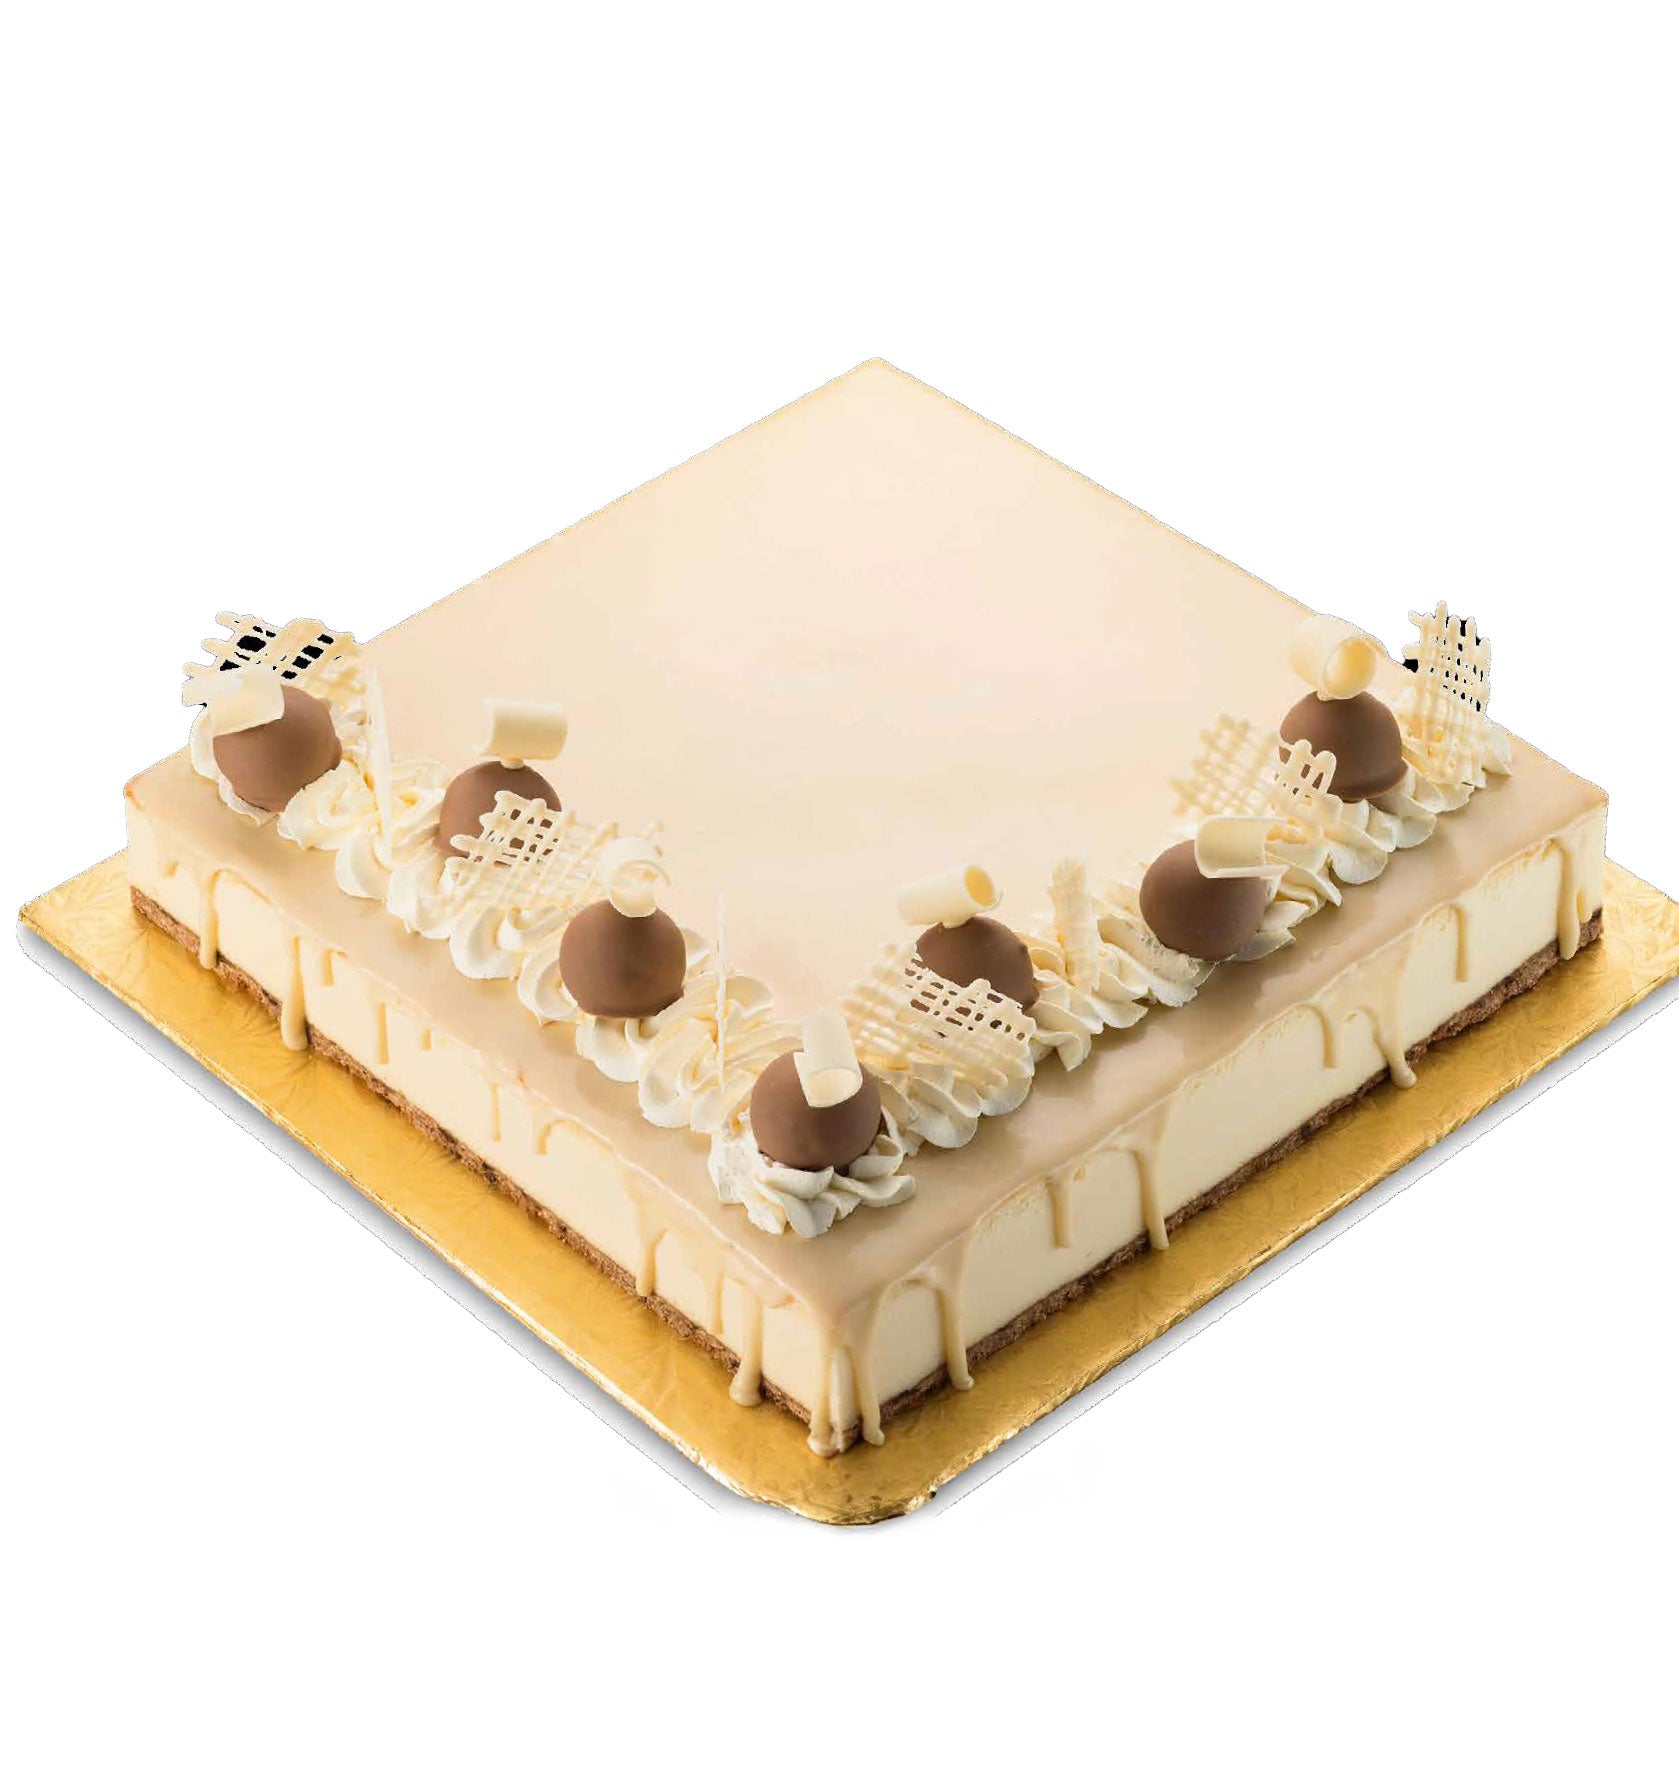 14"x14" Oversized Square Cheese Cake